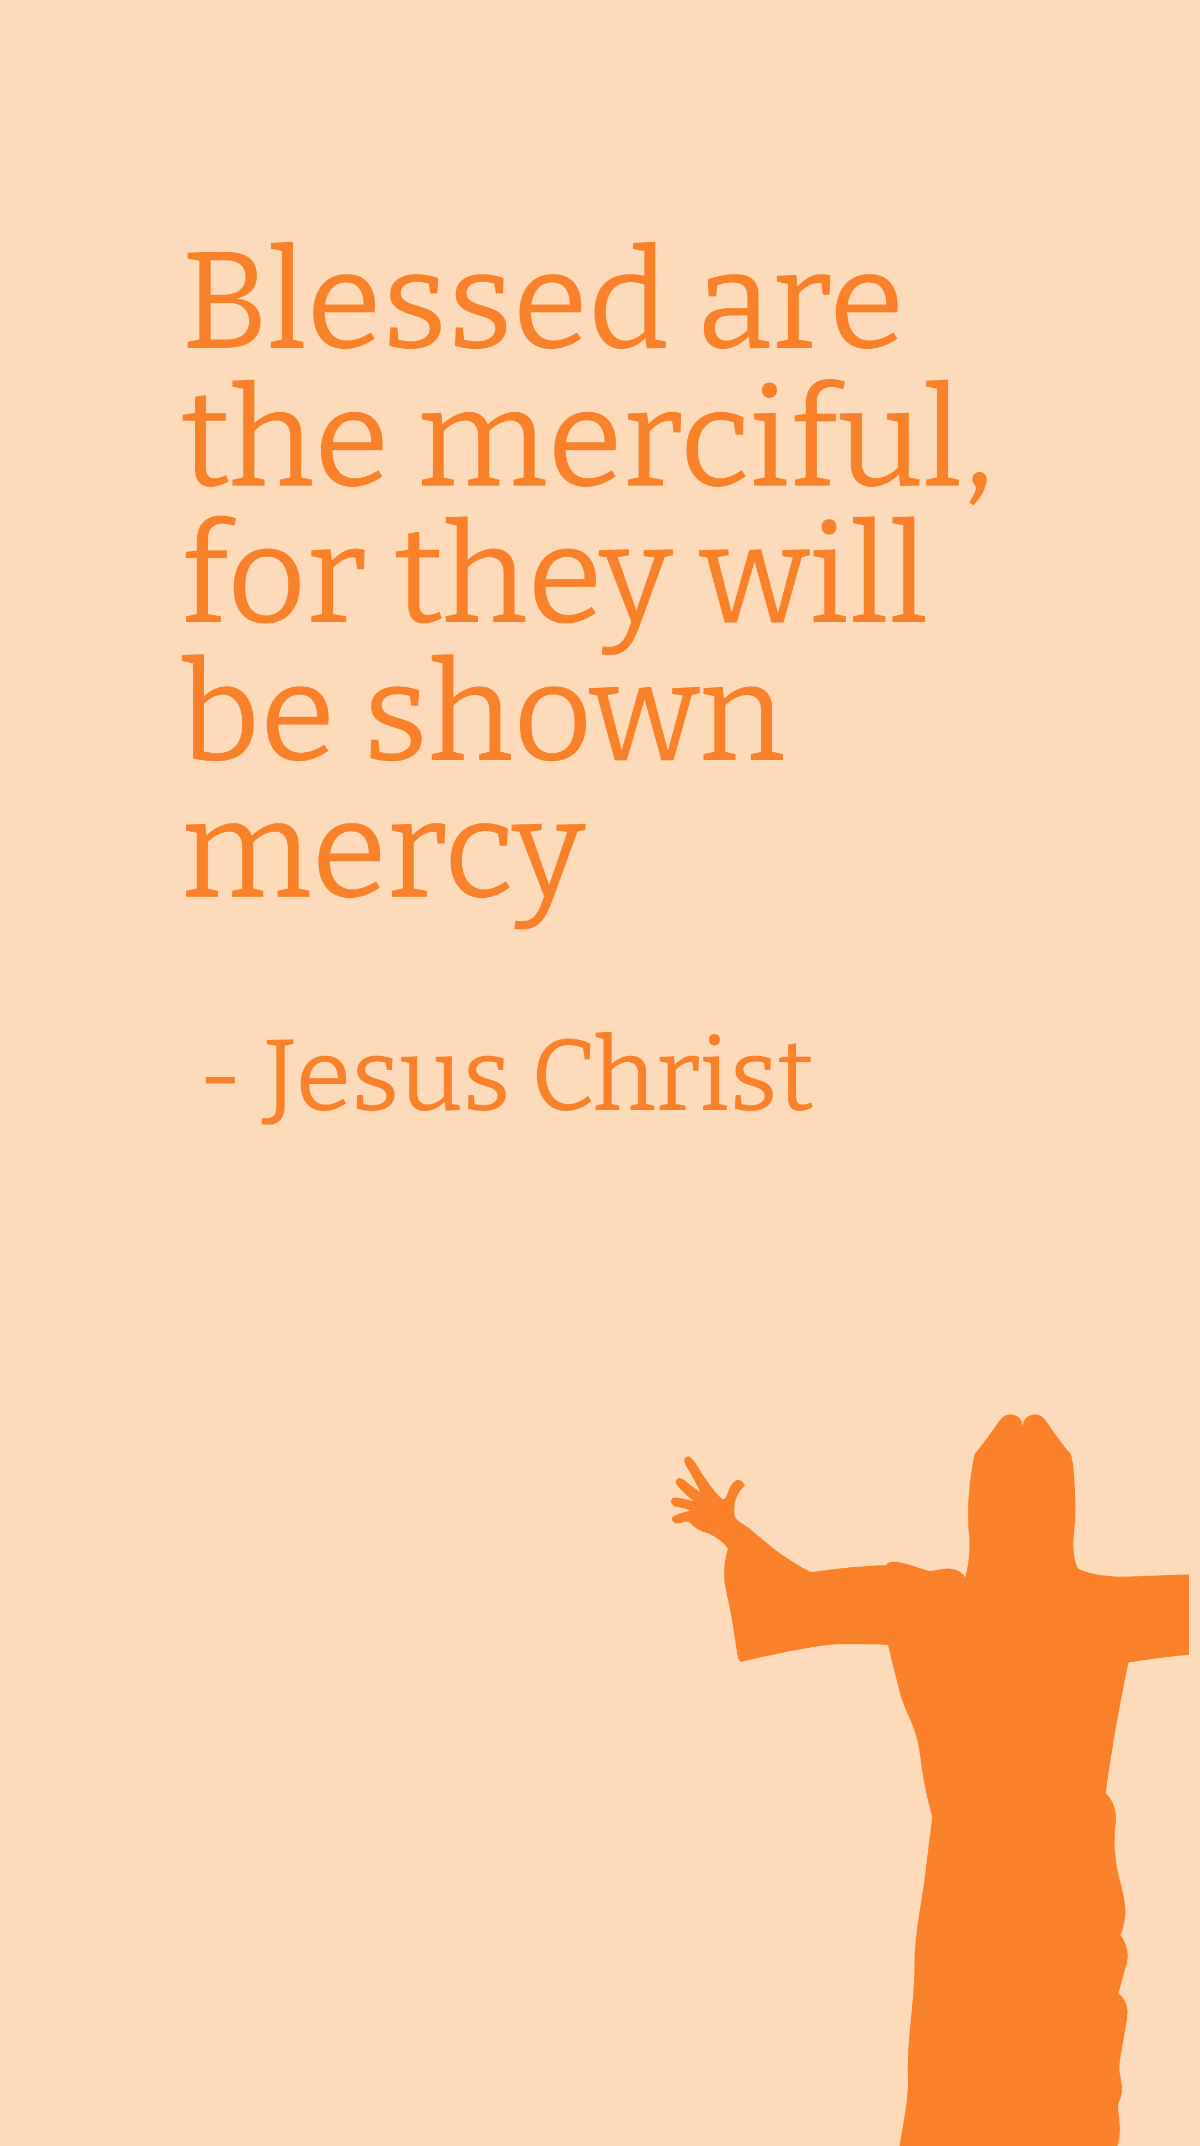 Jesus Christ - Blessed are the merciful, for they will be shown mercy Template